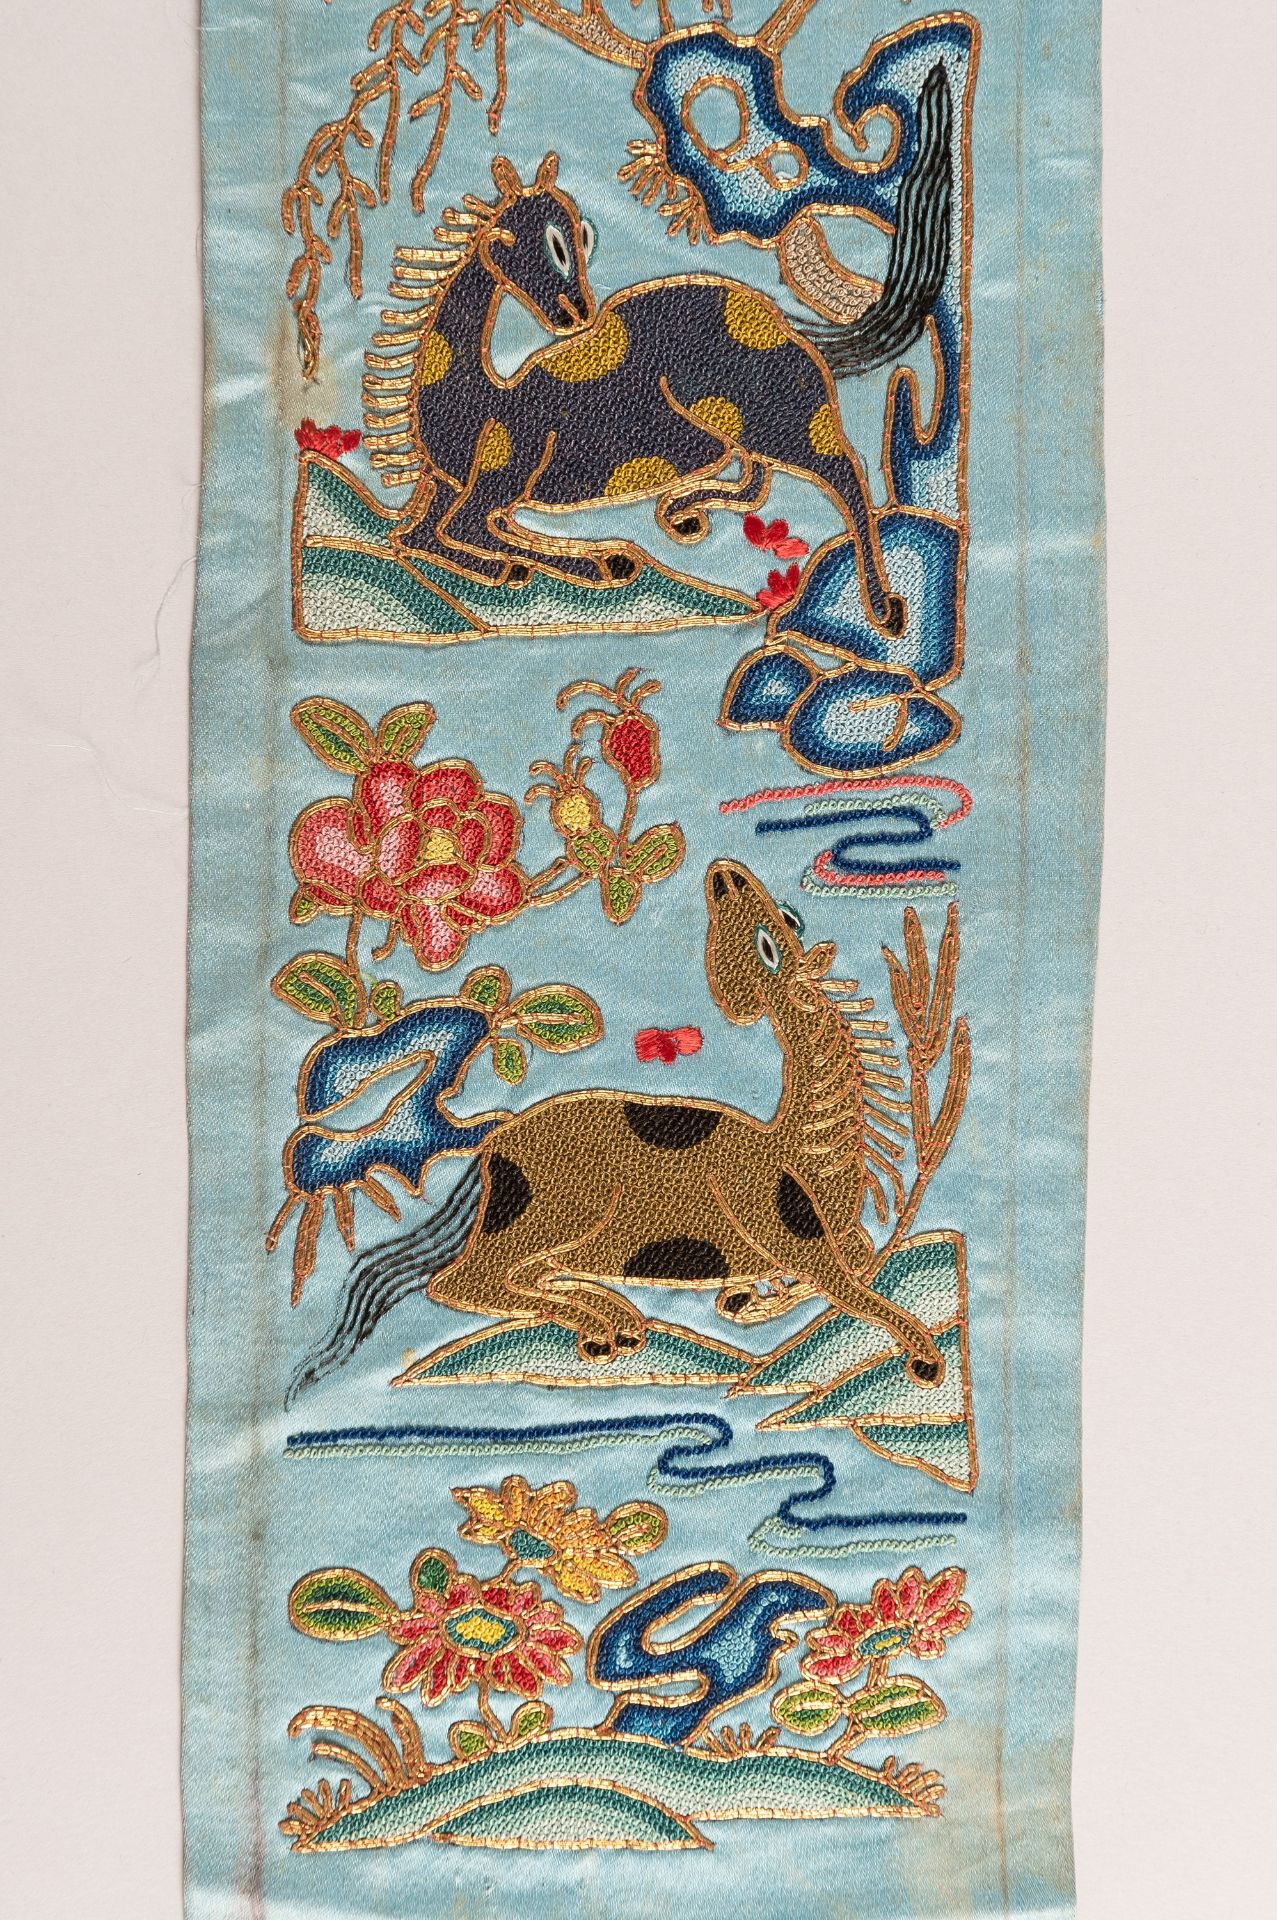 A PAIR OF 'EIGHT HORSES OF MUWANG' SILK SLEEVE BANDS, LATE QING DYNASTY - Image 6 of 8